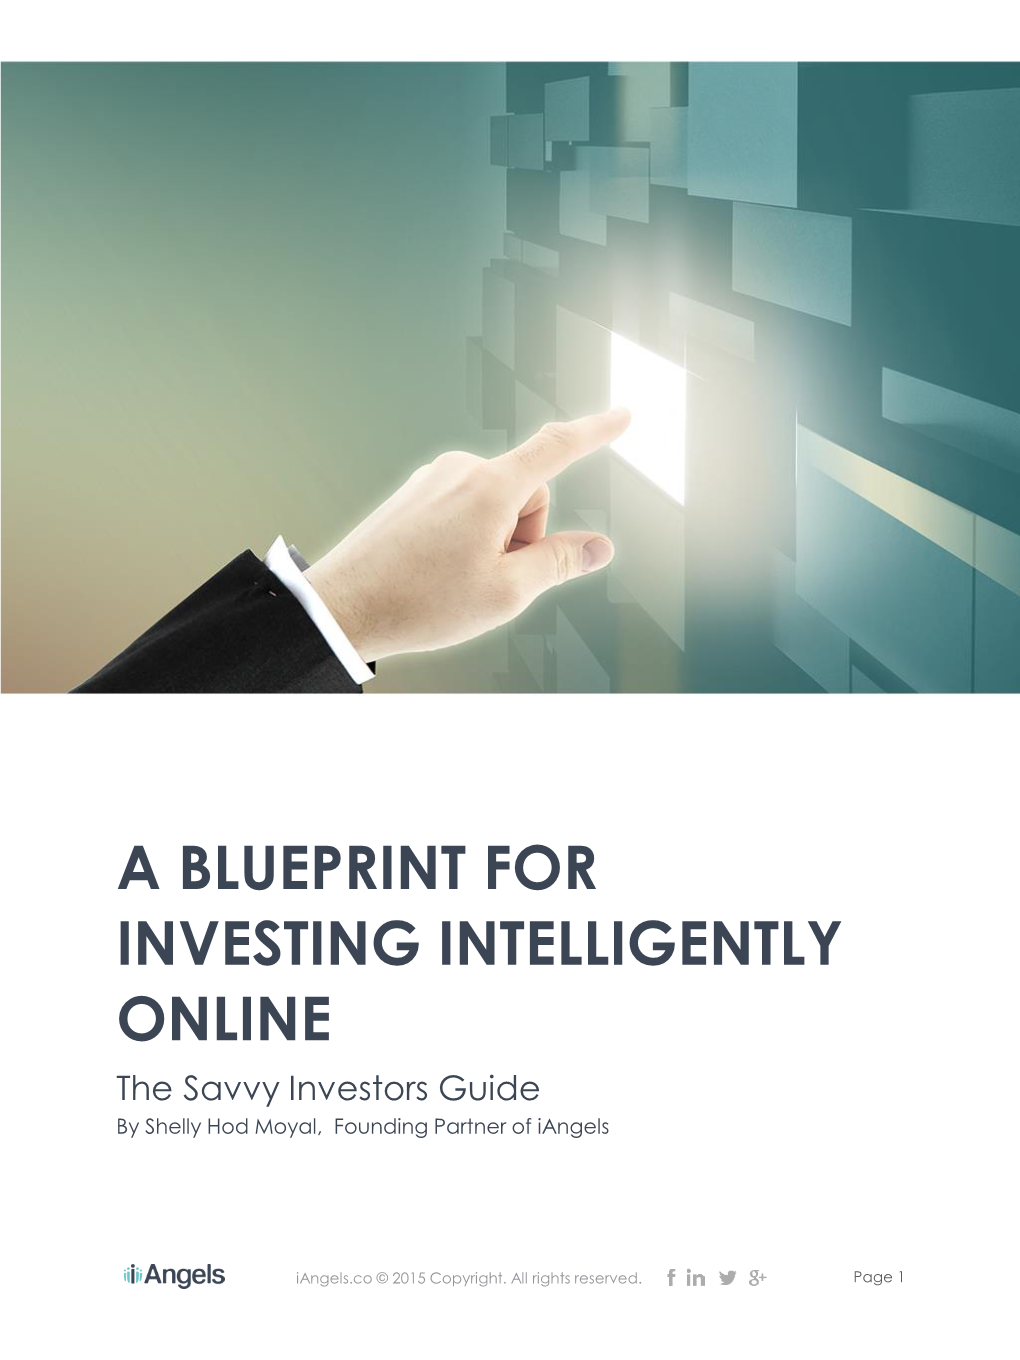 A BLUEPRINT for INVESTING INTELLIGENTLY ONLINE the Savvy Investors Guide by Shelly Hod Moyal, Founding Partner of Iangels